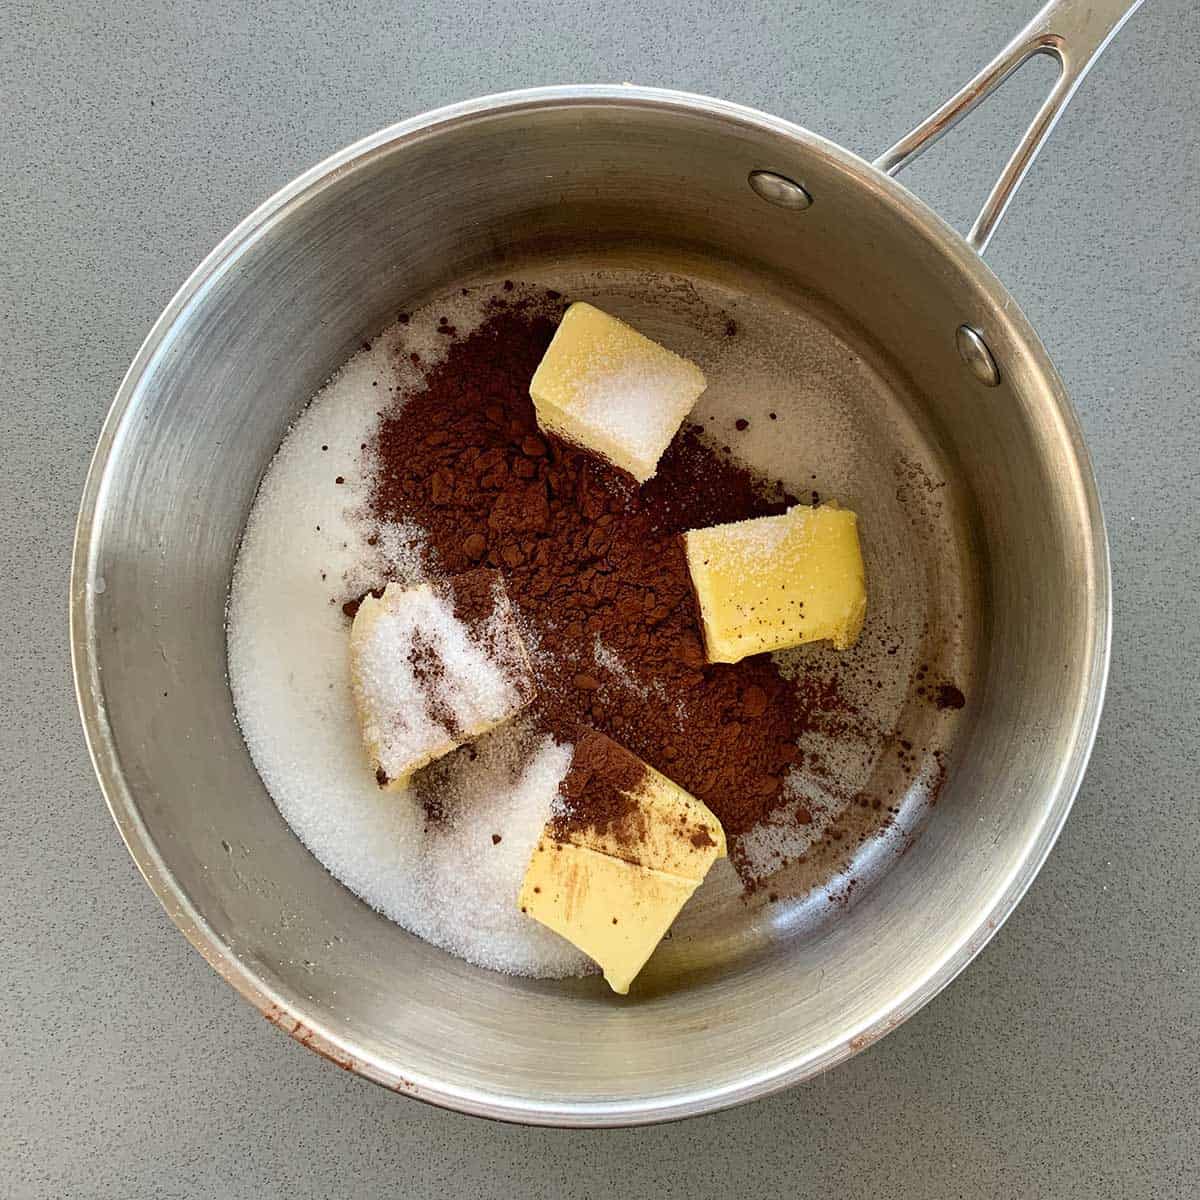 Butter, cocoa and sugar in the bottom of a saucepan.